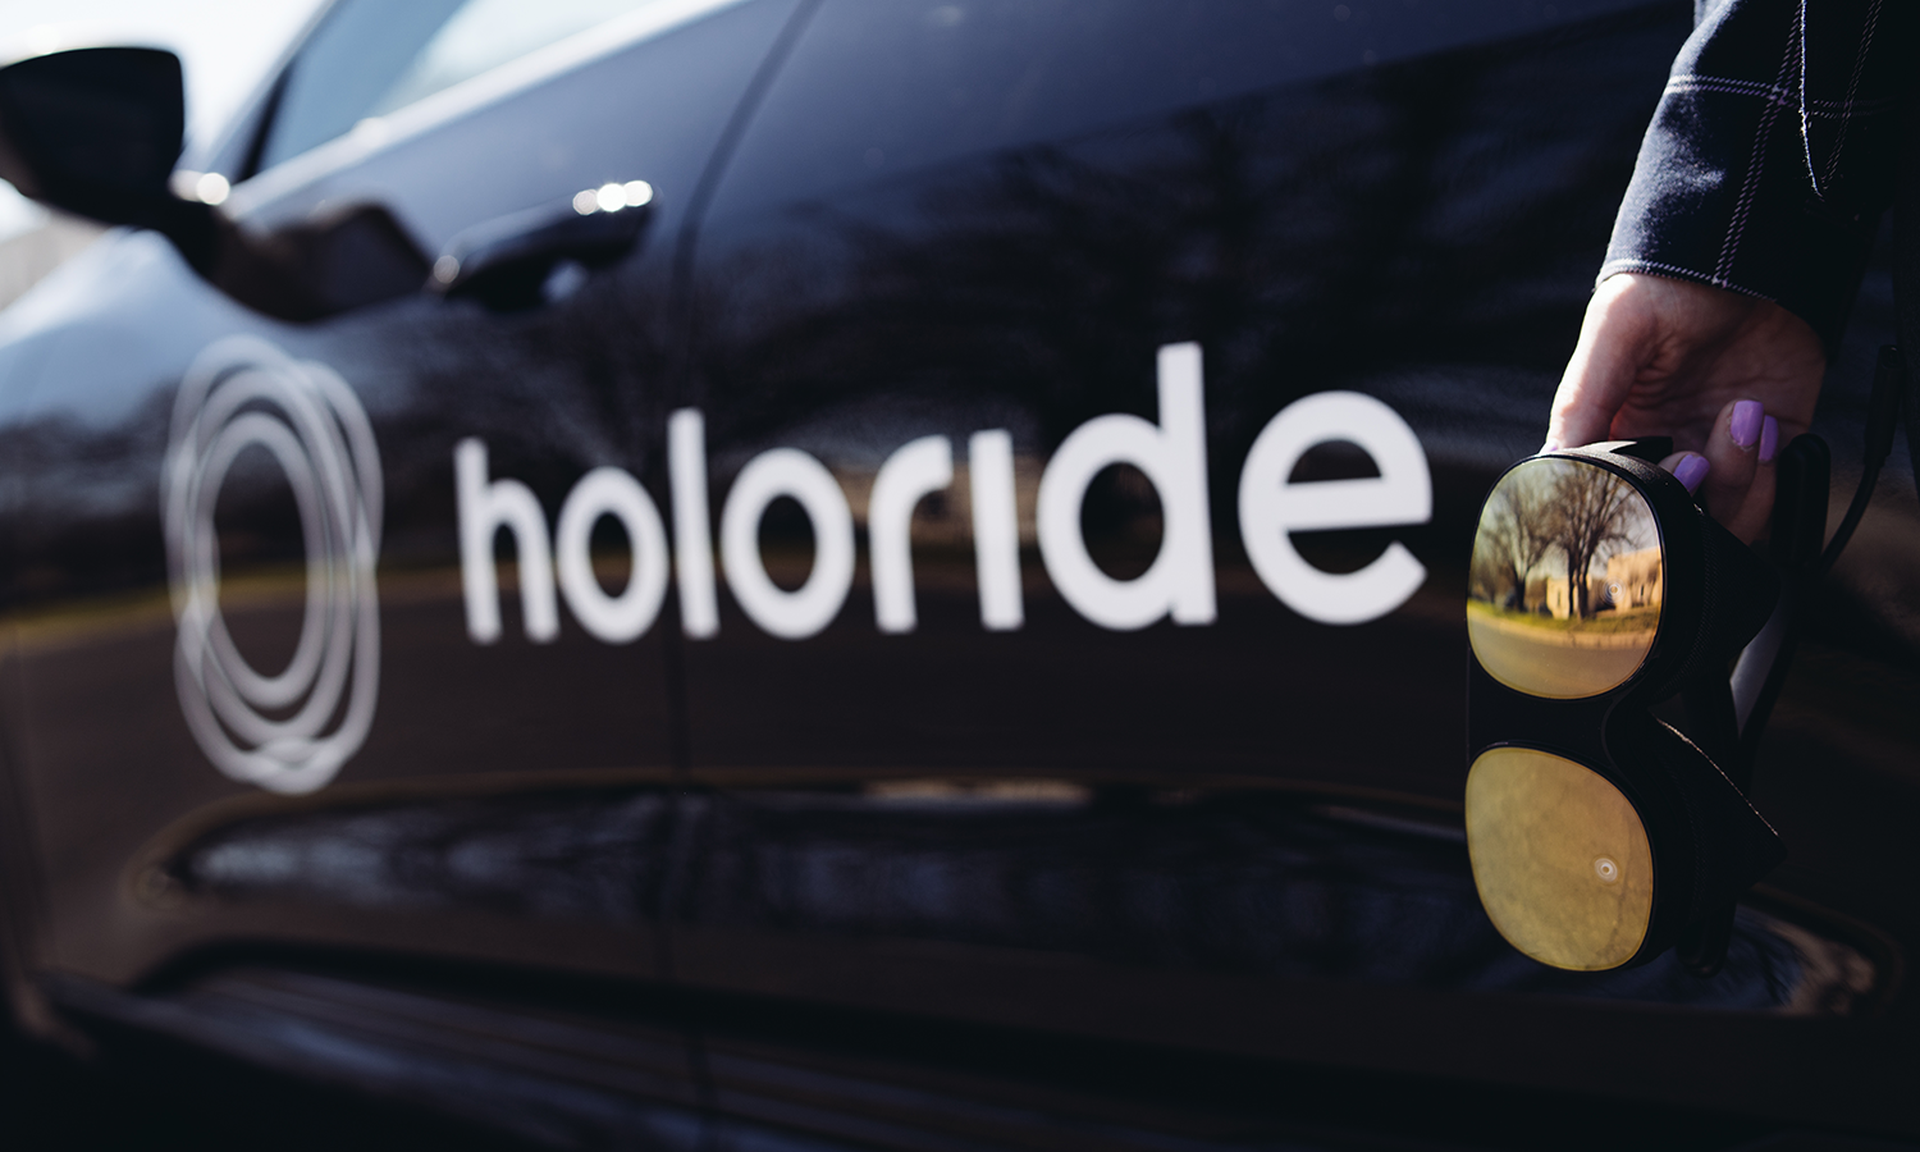 VR headset in the hand of a girl, hanging in front of a car with holoride branding